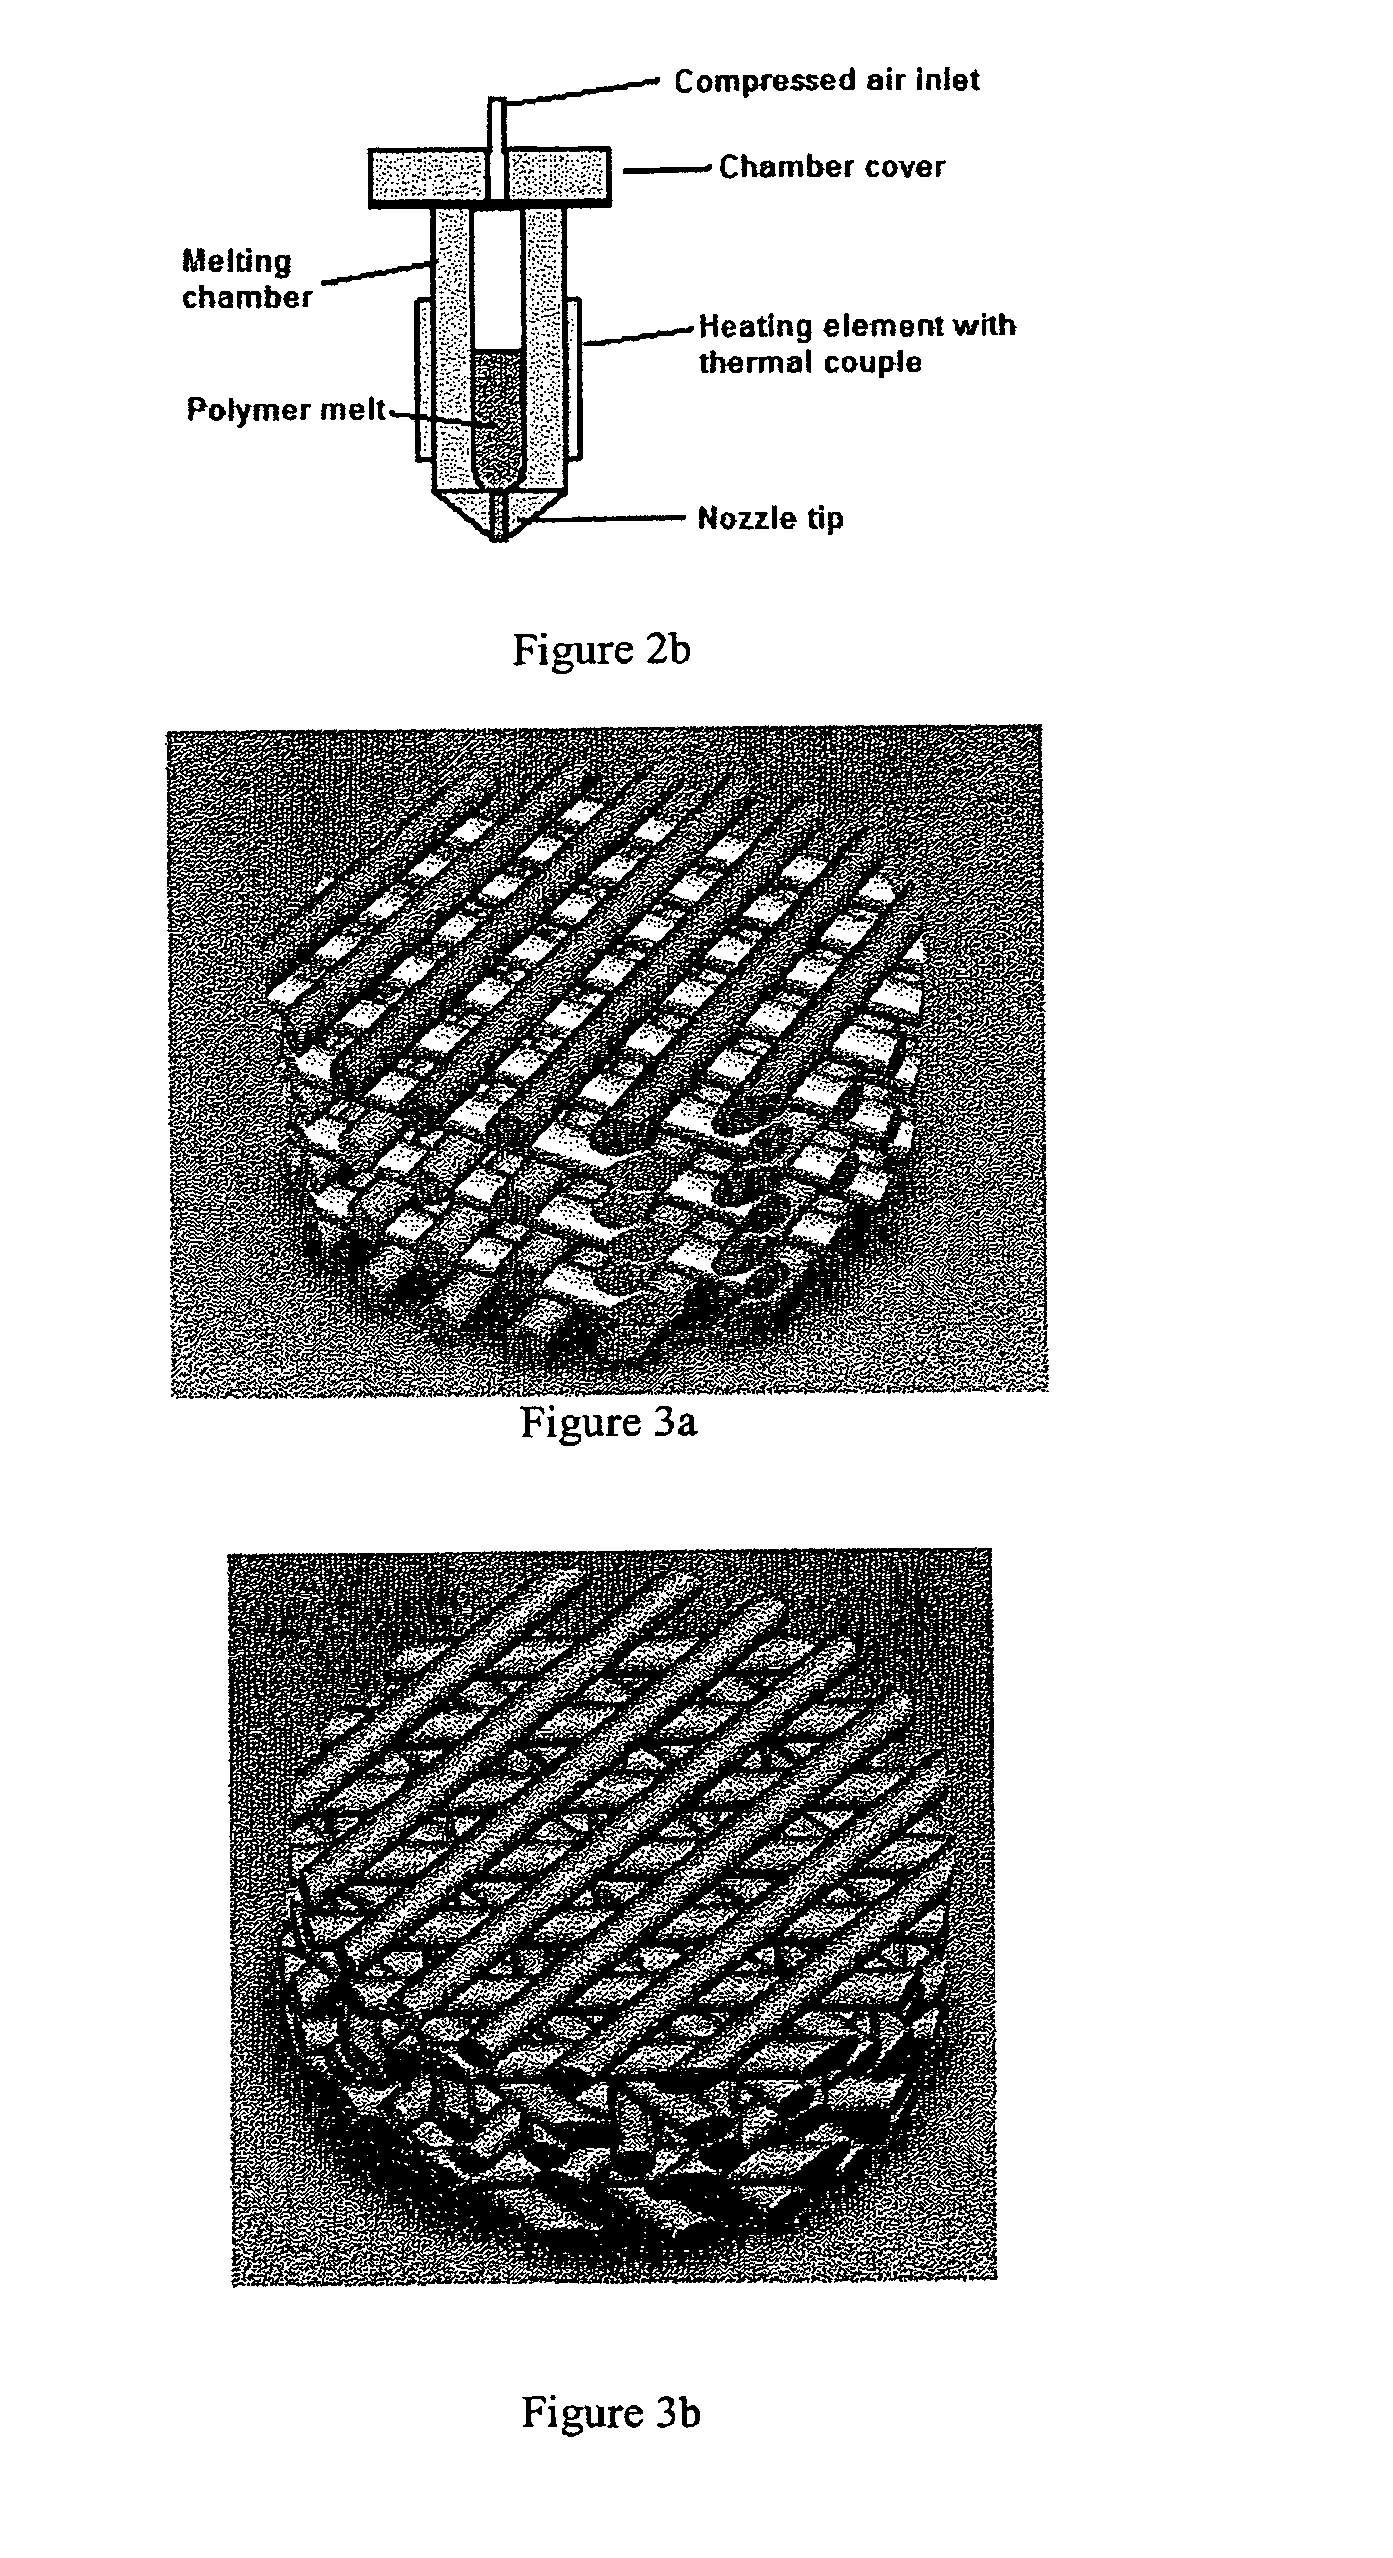 Methods and apparatus for fabricating porous 3-dimensional cell culture construct for cell culture and other biomedical applications